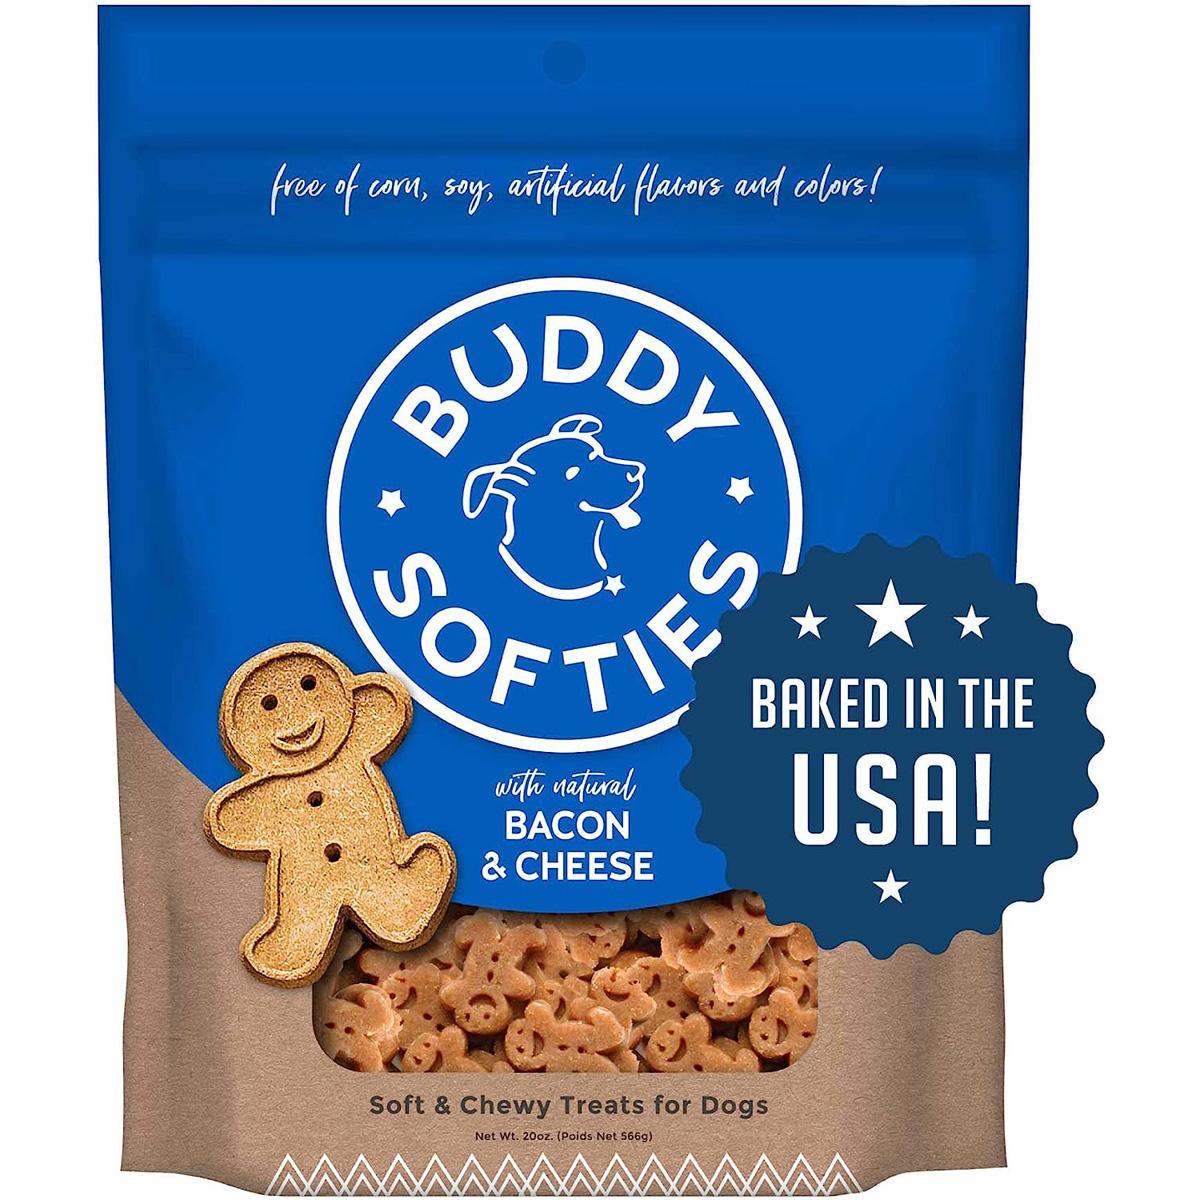 Buddy Biscuits Original Soft and Chewy Dog Treats for $4.89 Shipped